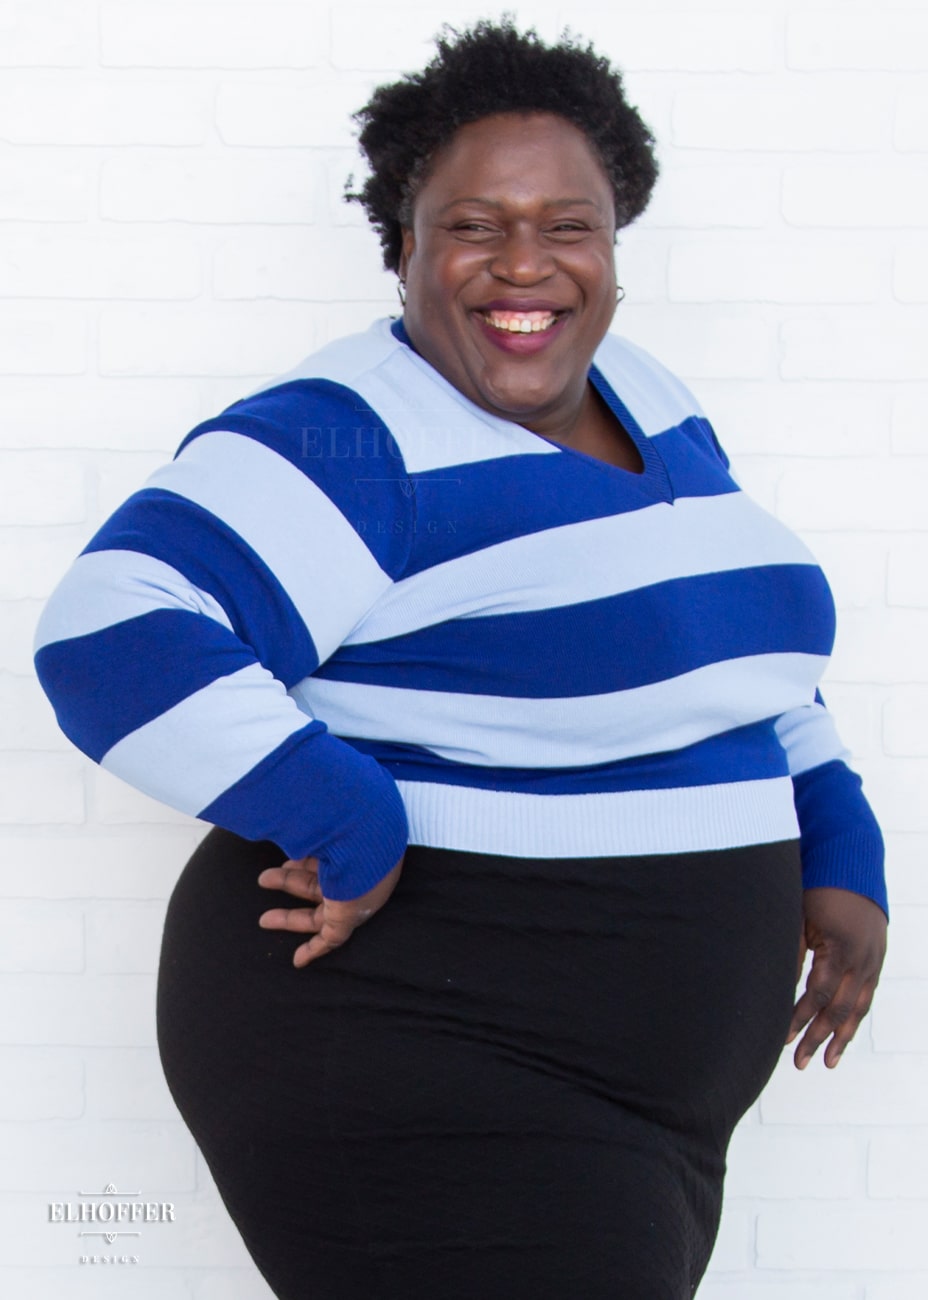 Adalgiza, a medium dark skinned 4xl model with short black super curly hair, is smiling while wearing a cropped v-neck sweater with fitted full length sleeves in horizontal thick stripes of bright blue and light blue.